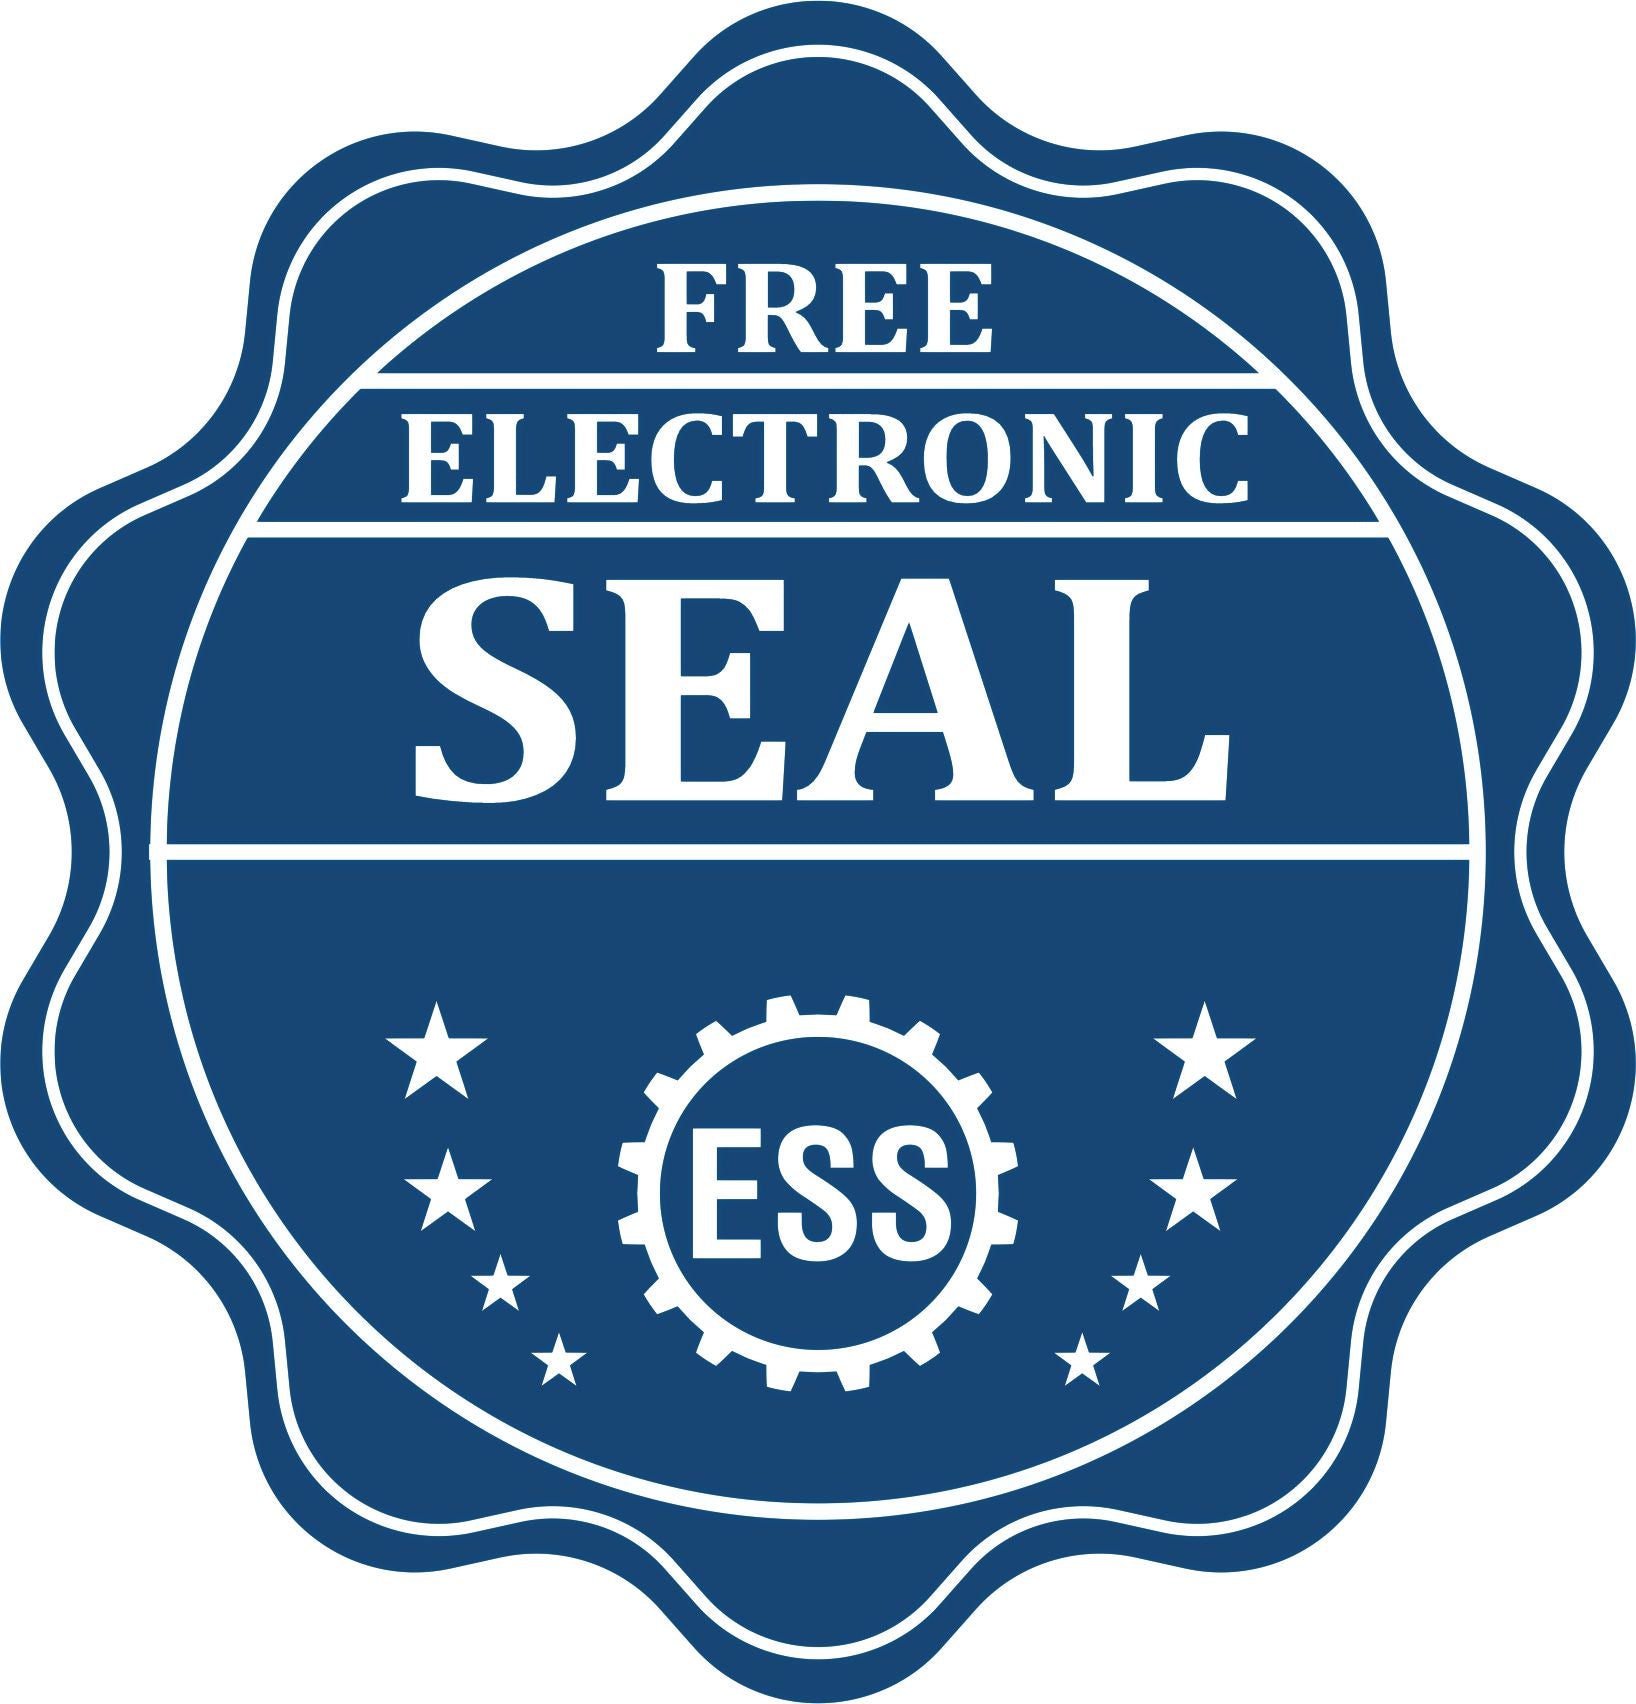 A badge showing a free electronic seal for the Self-Inking Louisiana Landscape Architect Stamp with stars and the ESS gear on the emblem.